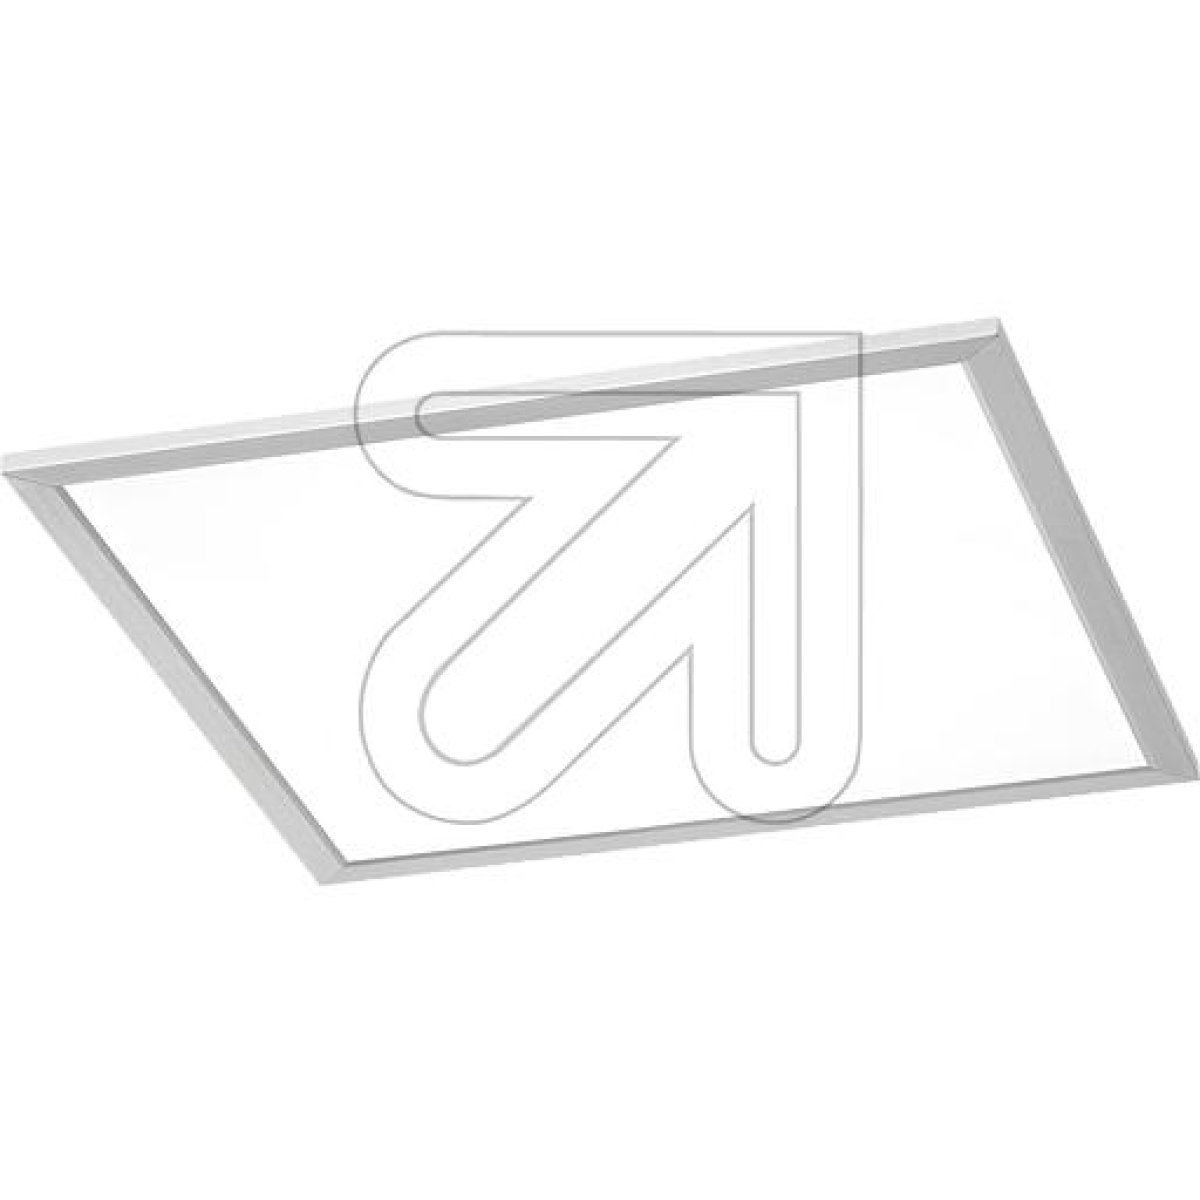 TRIOLED surface-mounted light 450x450mm 25W 3000K, nickel matt, dimmable, 674014507Article-No: 681570